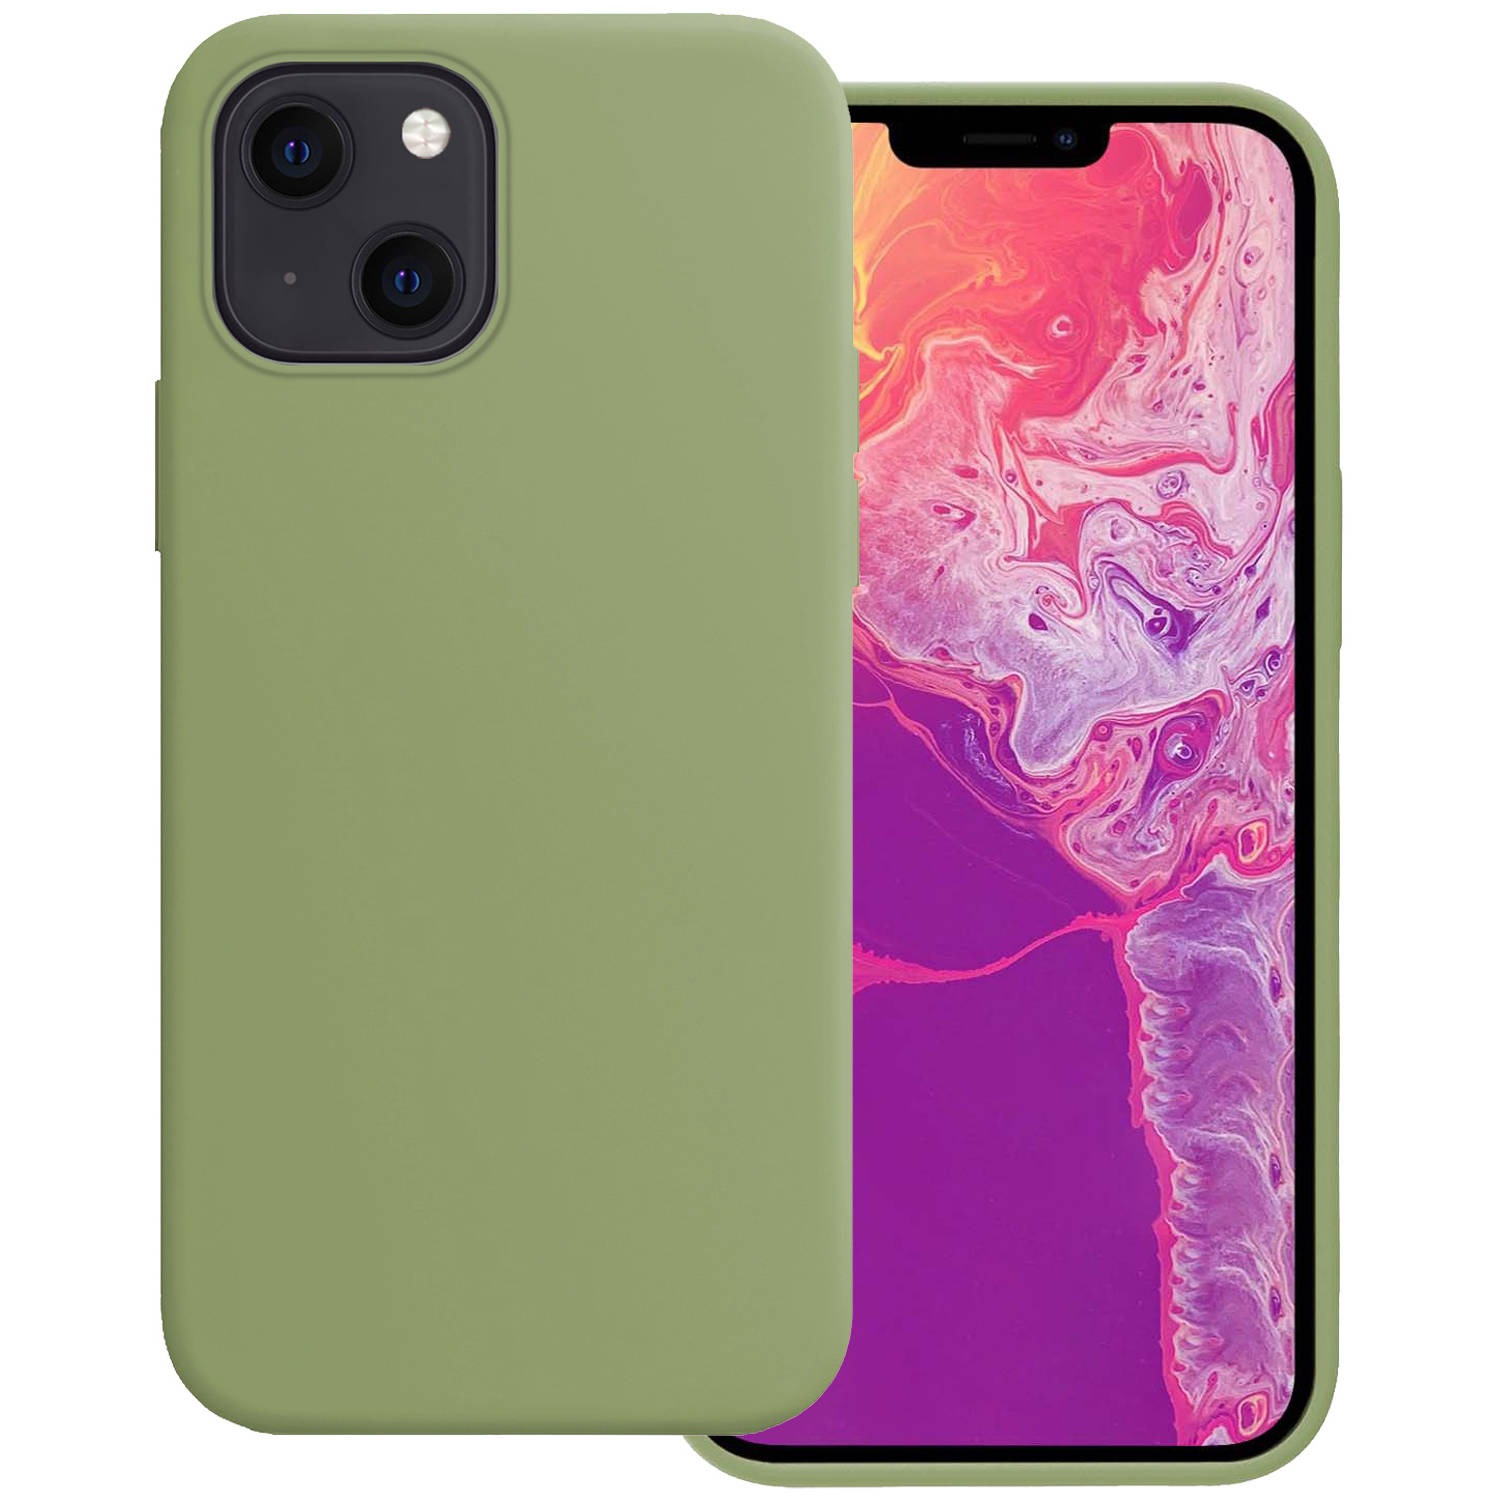 Basey Iphone 13 Hoesje Silicone Case Iphone 13 Case Groen Siliconen Hoes Iphone 13 Hoes Cover Groen